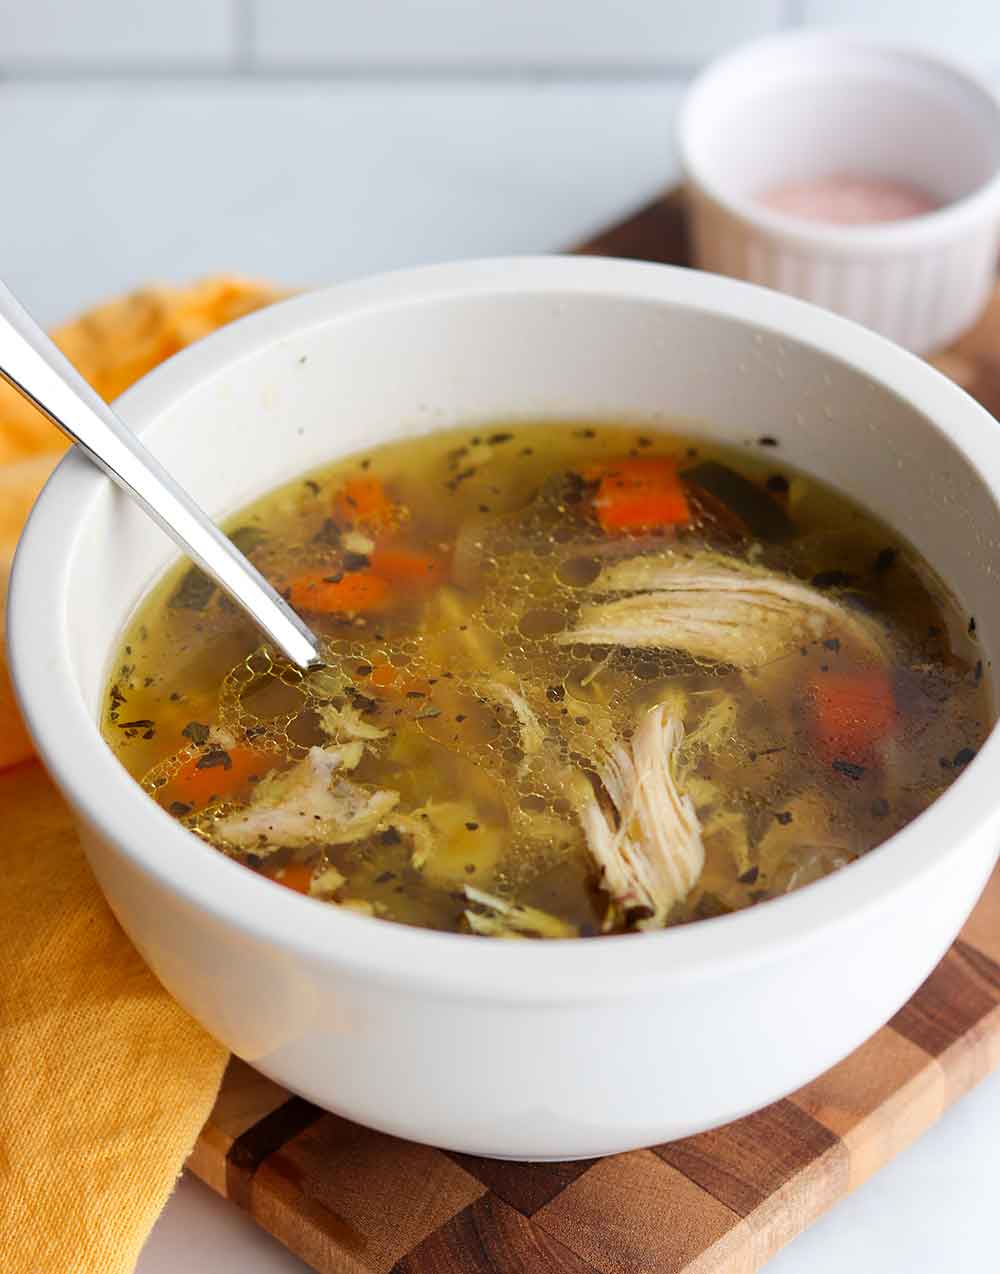 Crockpot chicken soup in a single serving white ceramic bowl with spoon